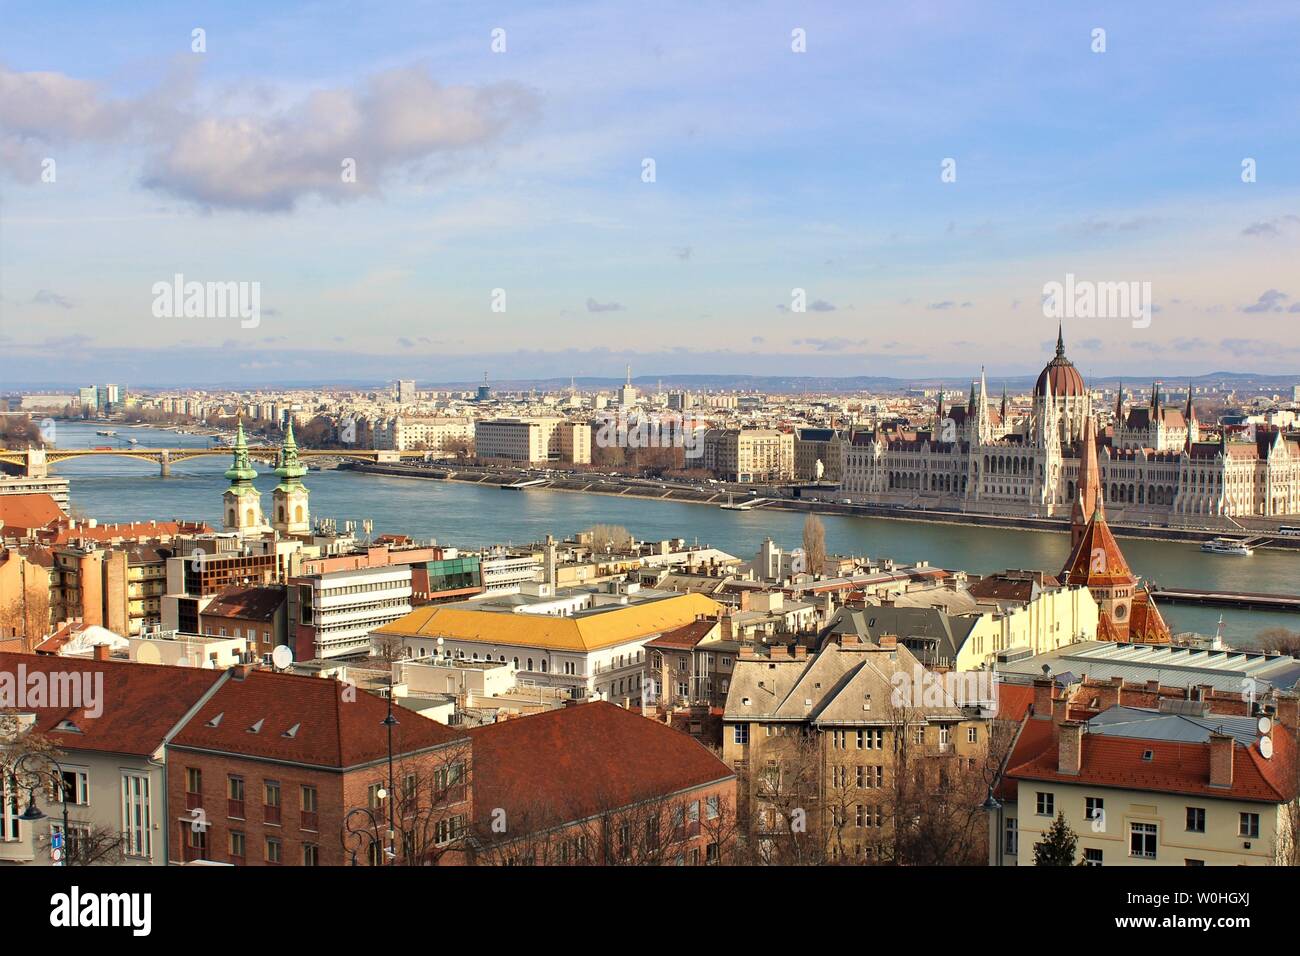 View of the Hungarian capital city of Budapest, including the iconic Danube River, House of Parliament and Margaret Bridge. Stock Photo